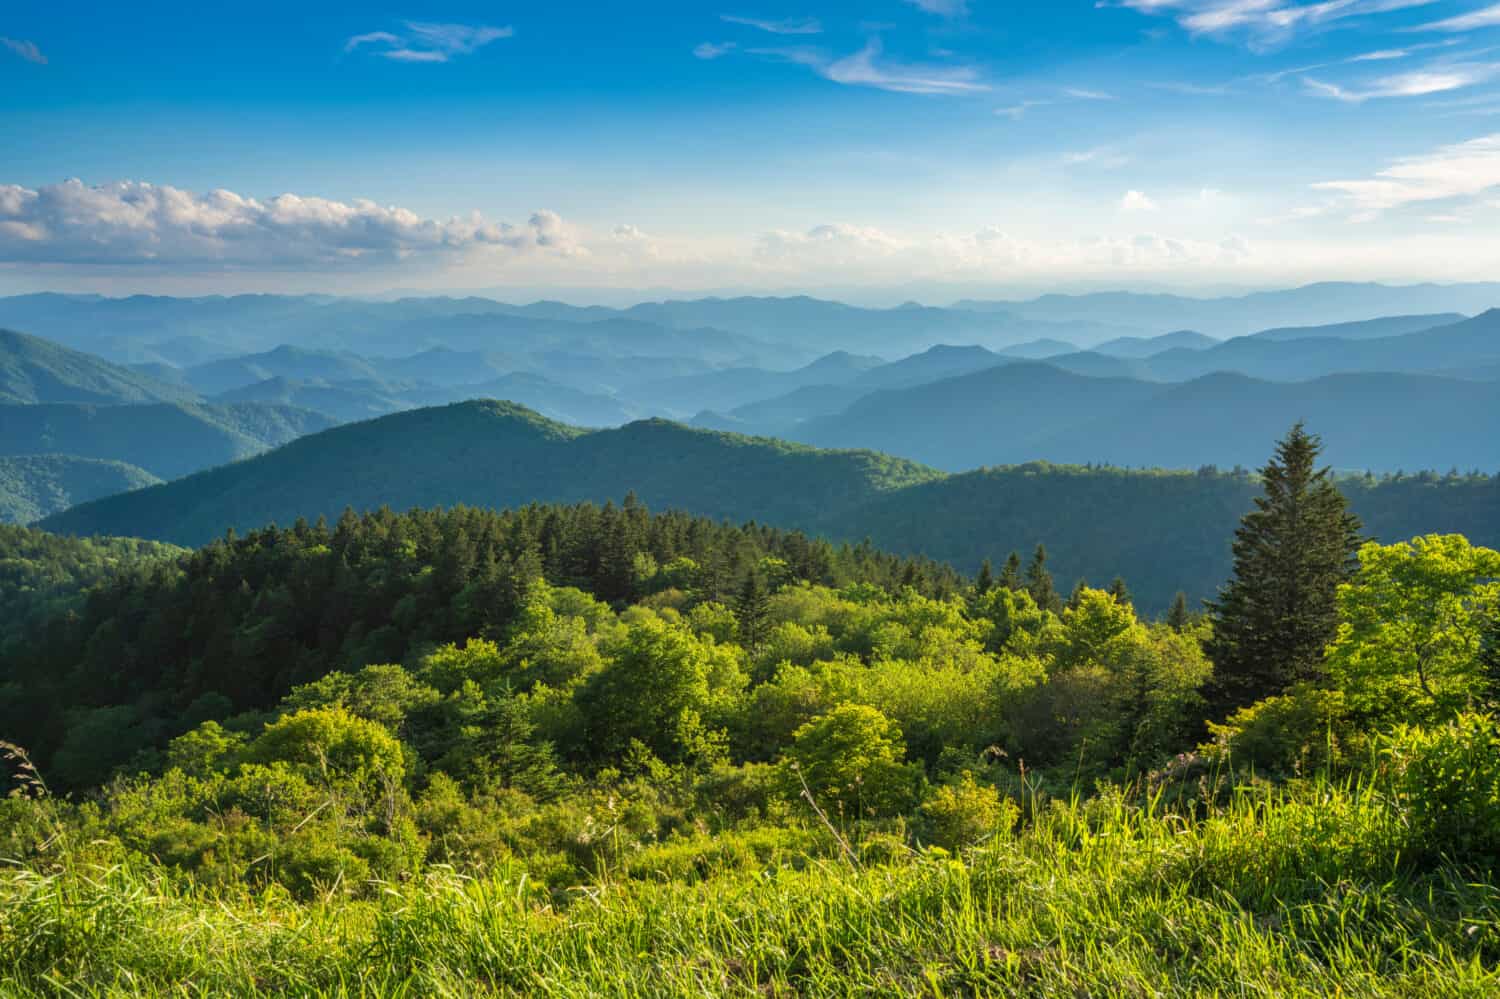 Beautiful summer mountain landscape. Blue sky with clouds over layers of green hills and mountains. Copy space. North Carolina. Blue Ridge Parkway.USA.